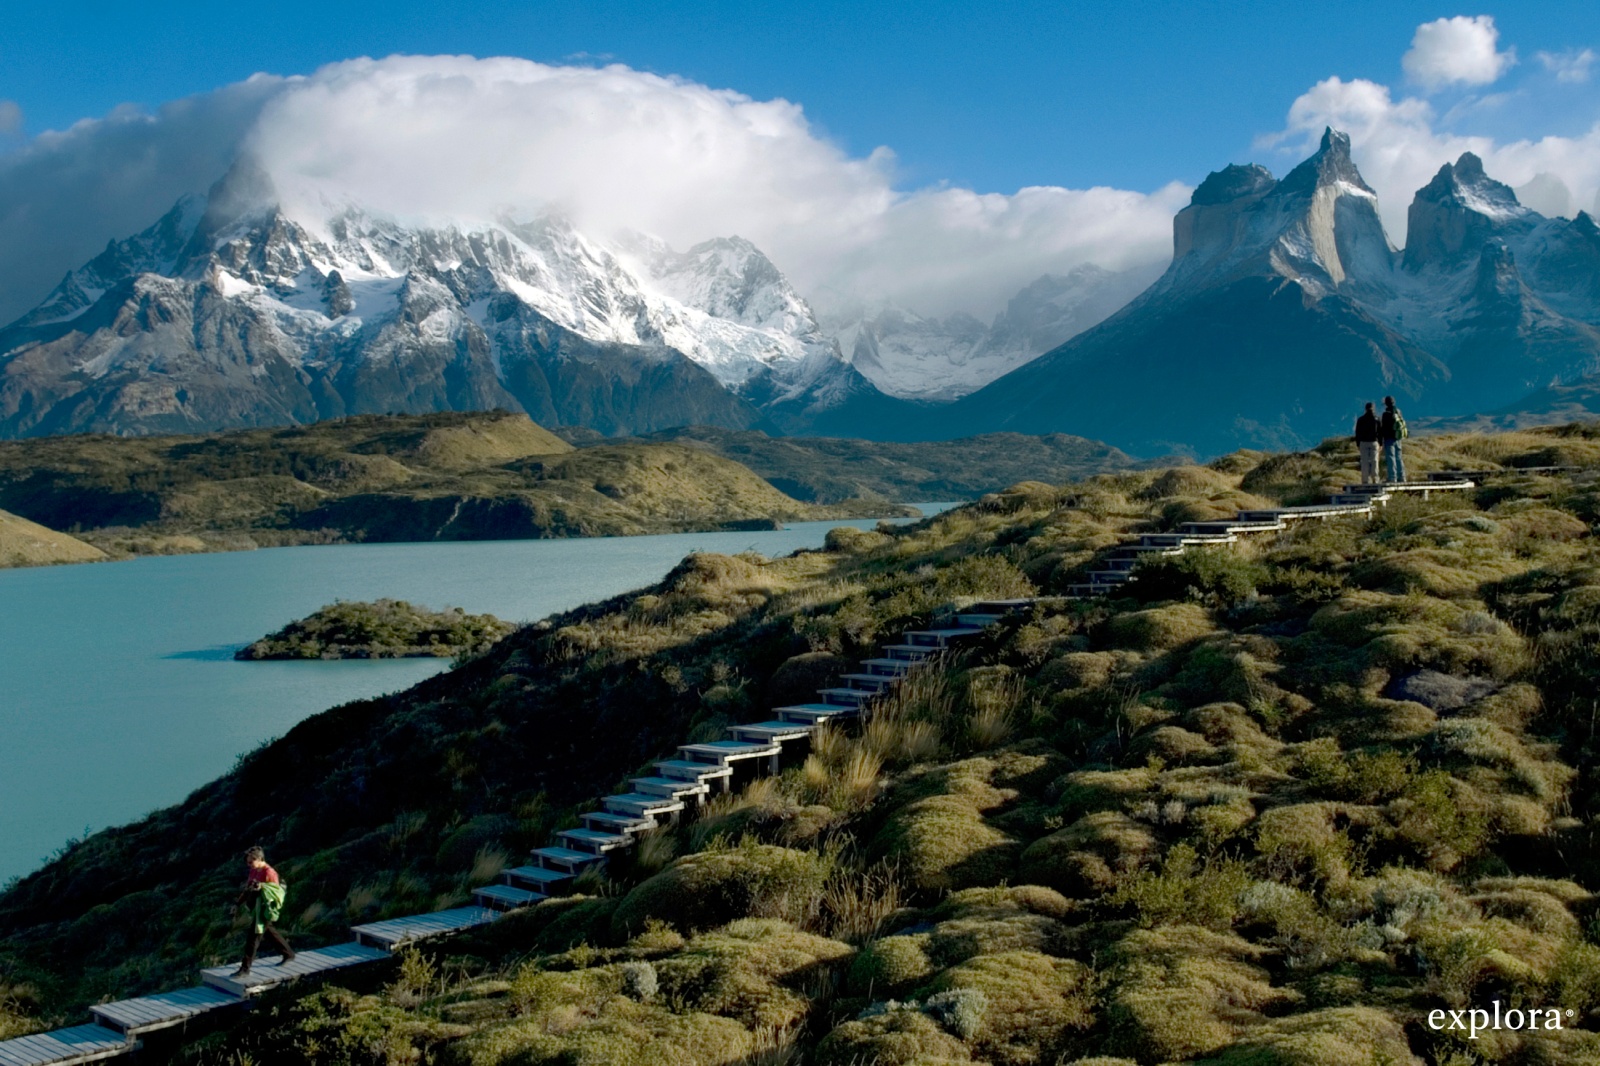 Hotel Salto Chico-Explora Patagonia- Deluxe Torres Del Paine Nt Park, Chile  Hotels- GDS Reservation Codes: Travel Weekly